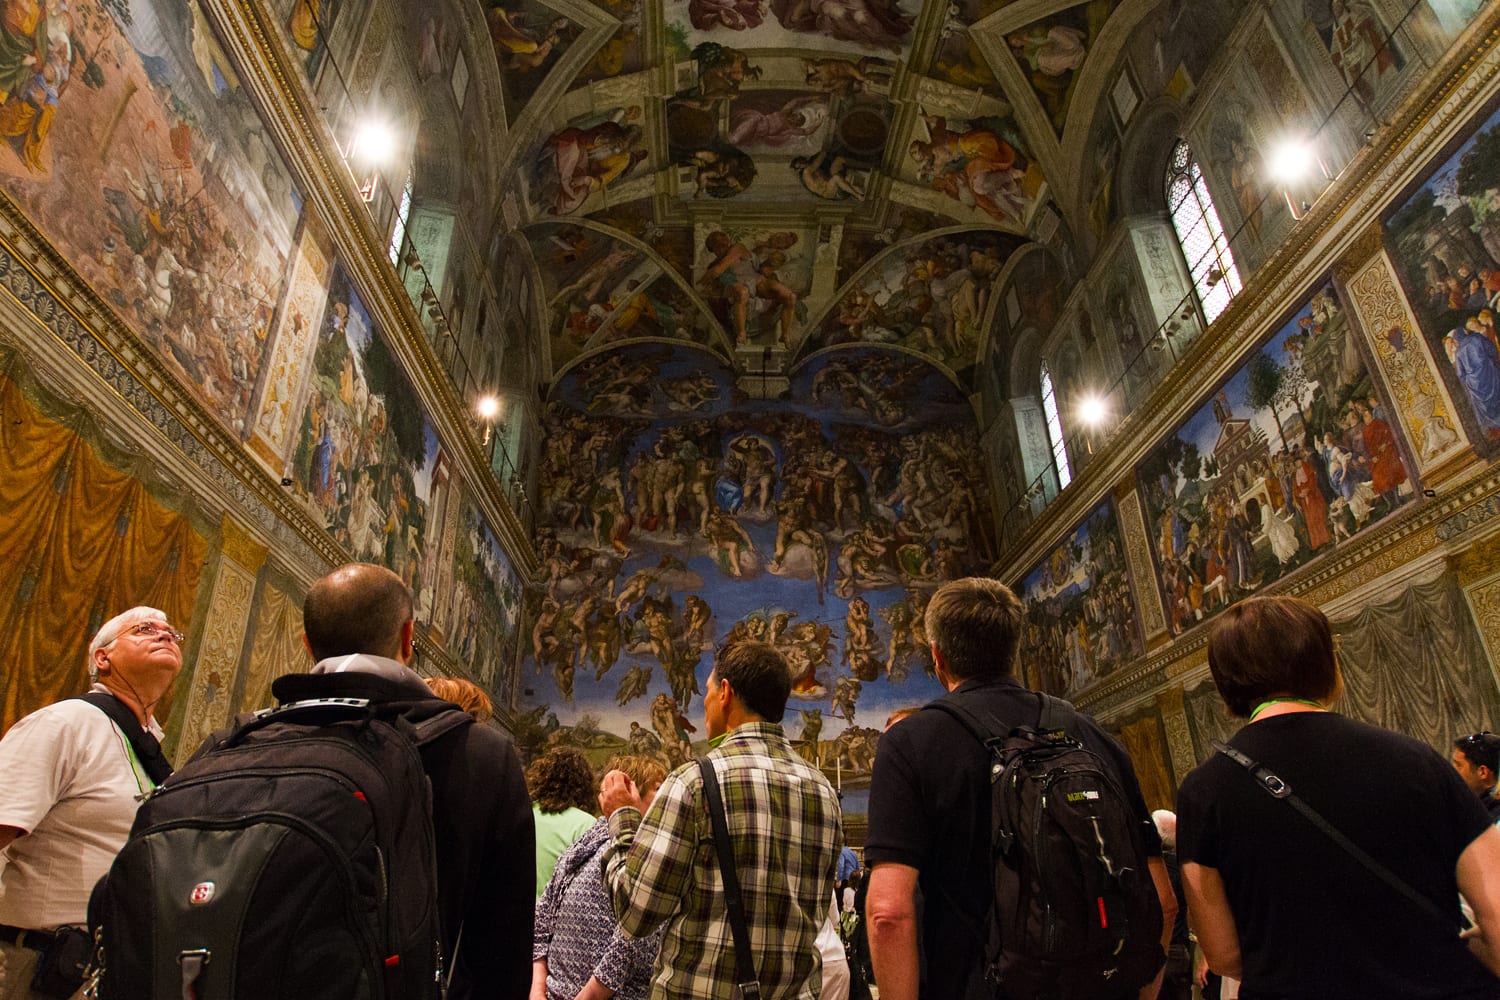 The Sistine Chapel in the Vatican Museums